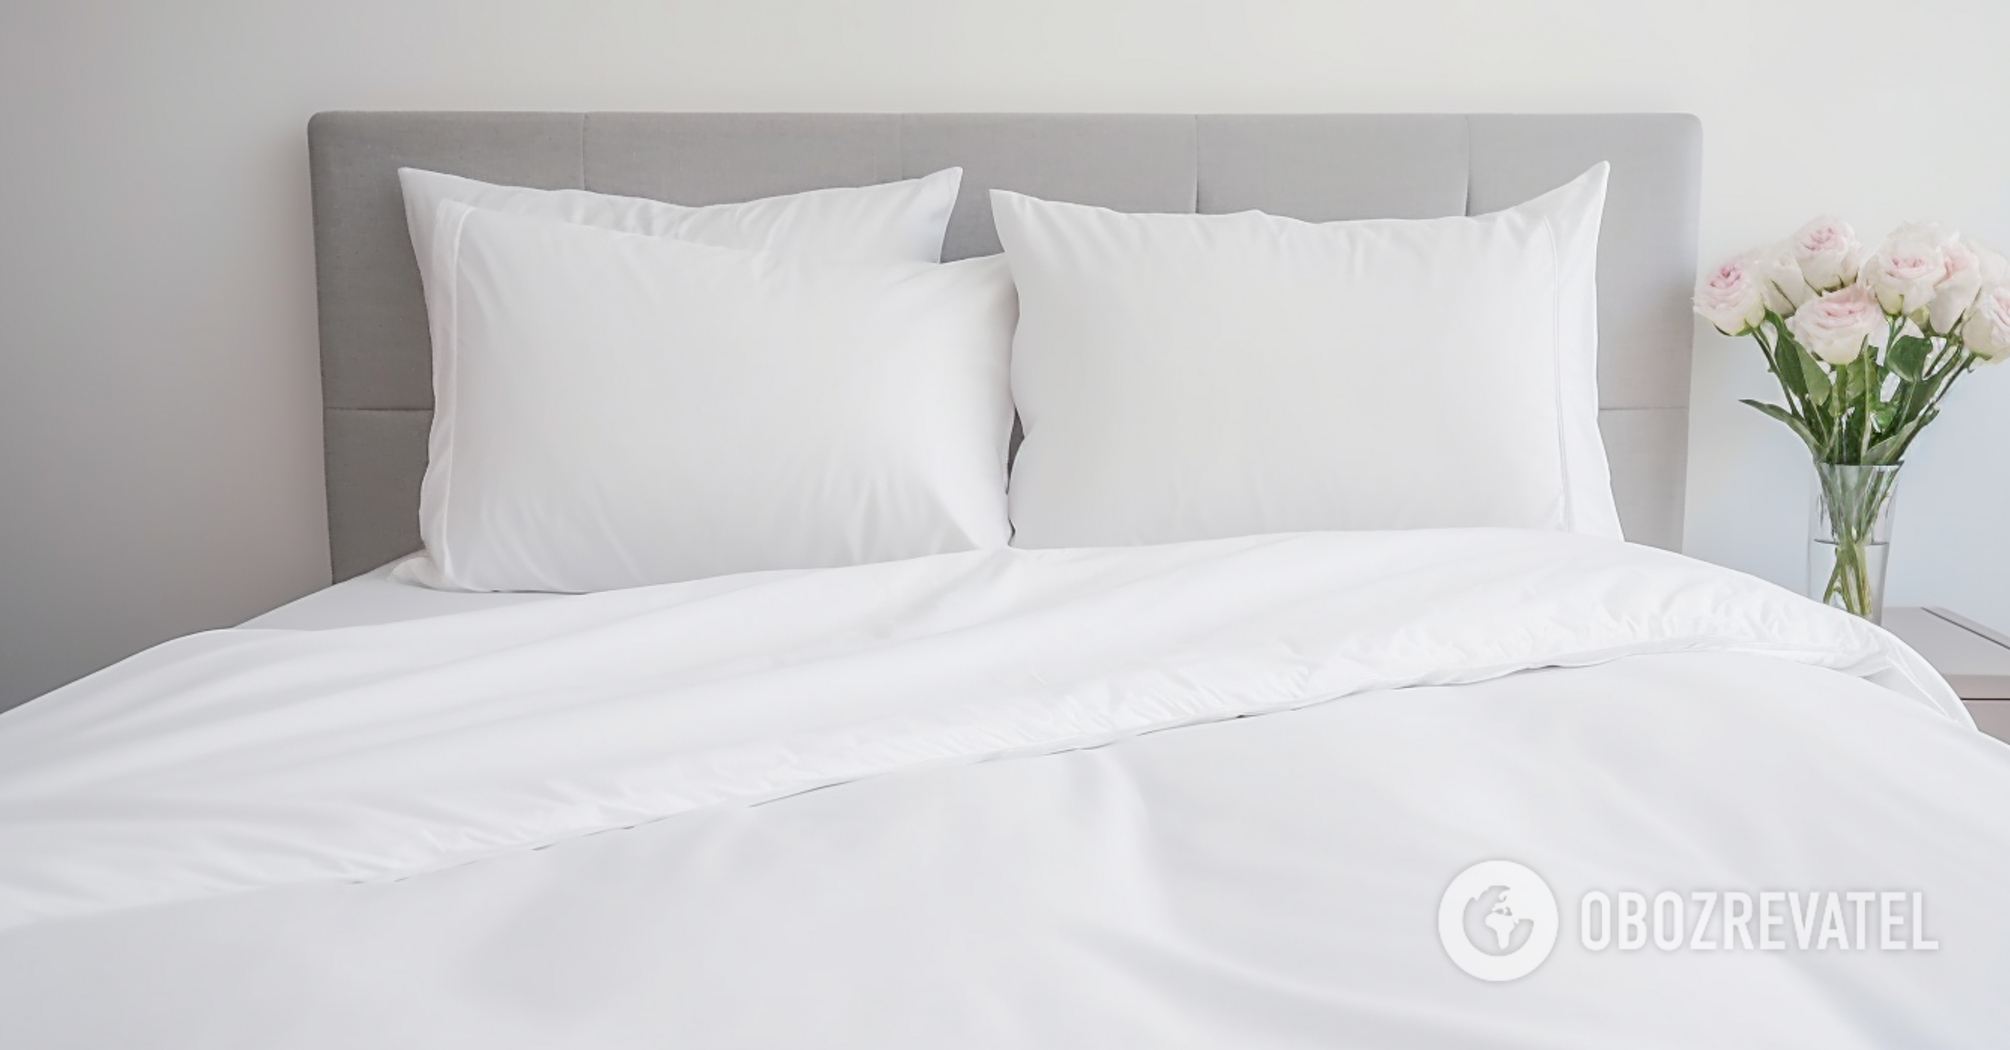 A washing mistake turns your white sheets yellow: here's what not to do